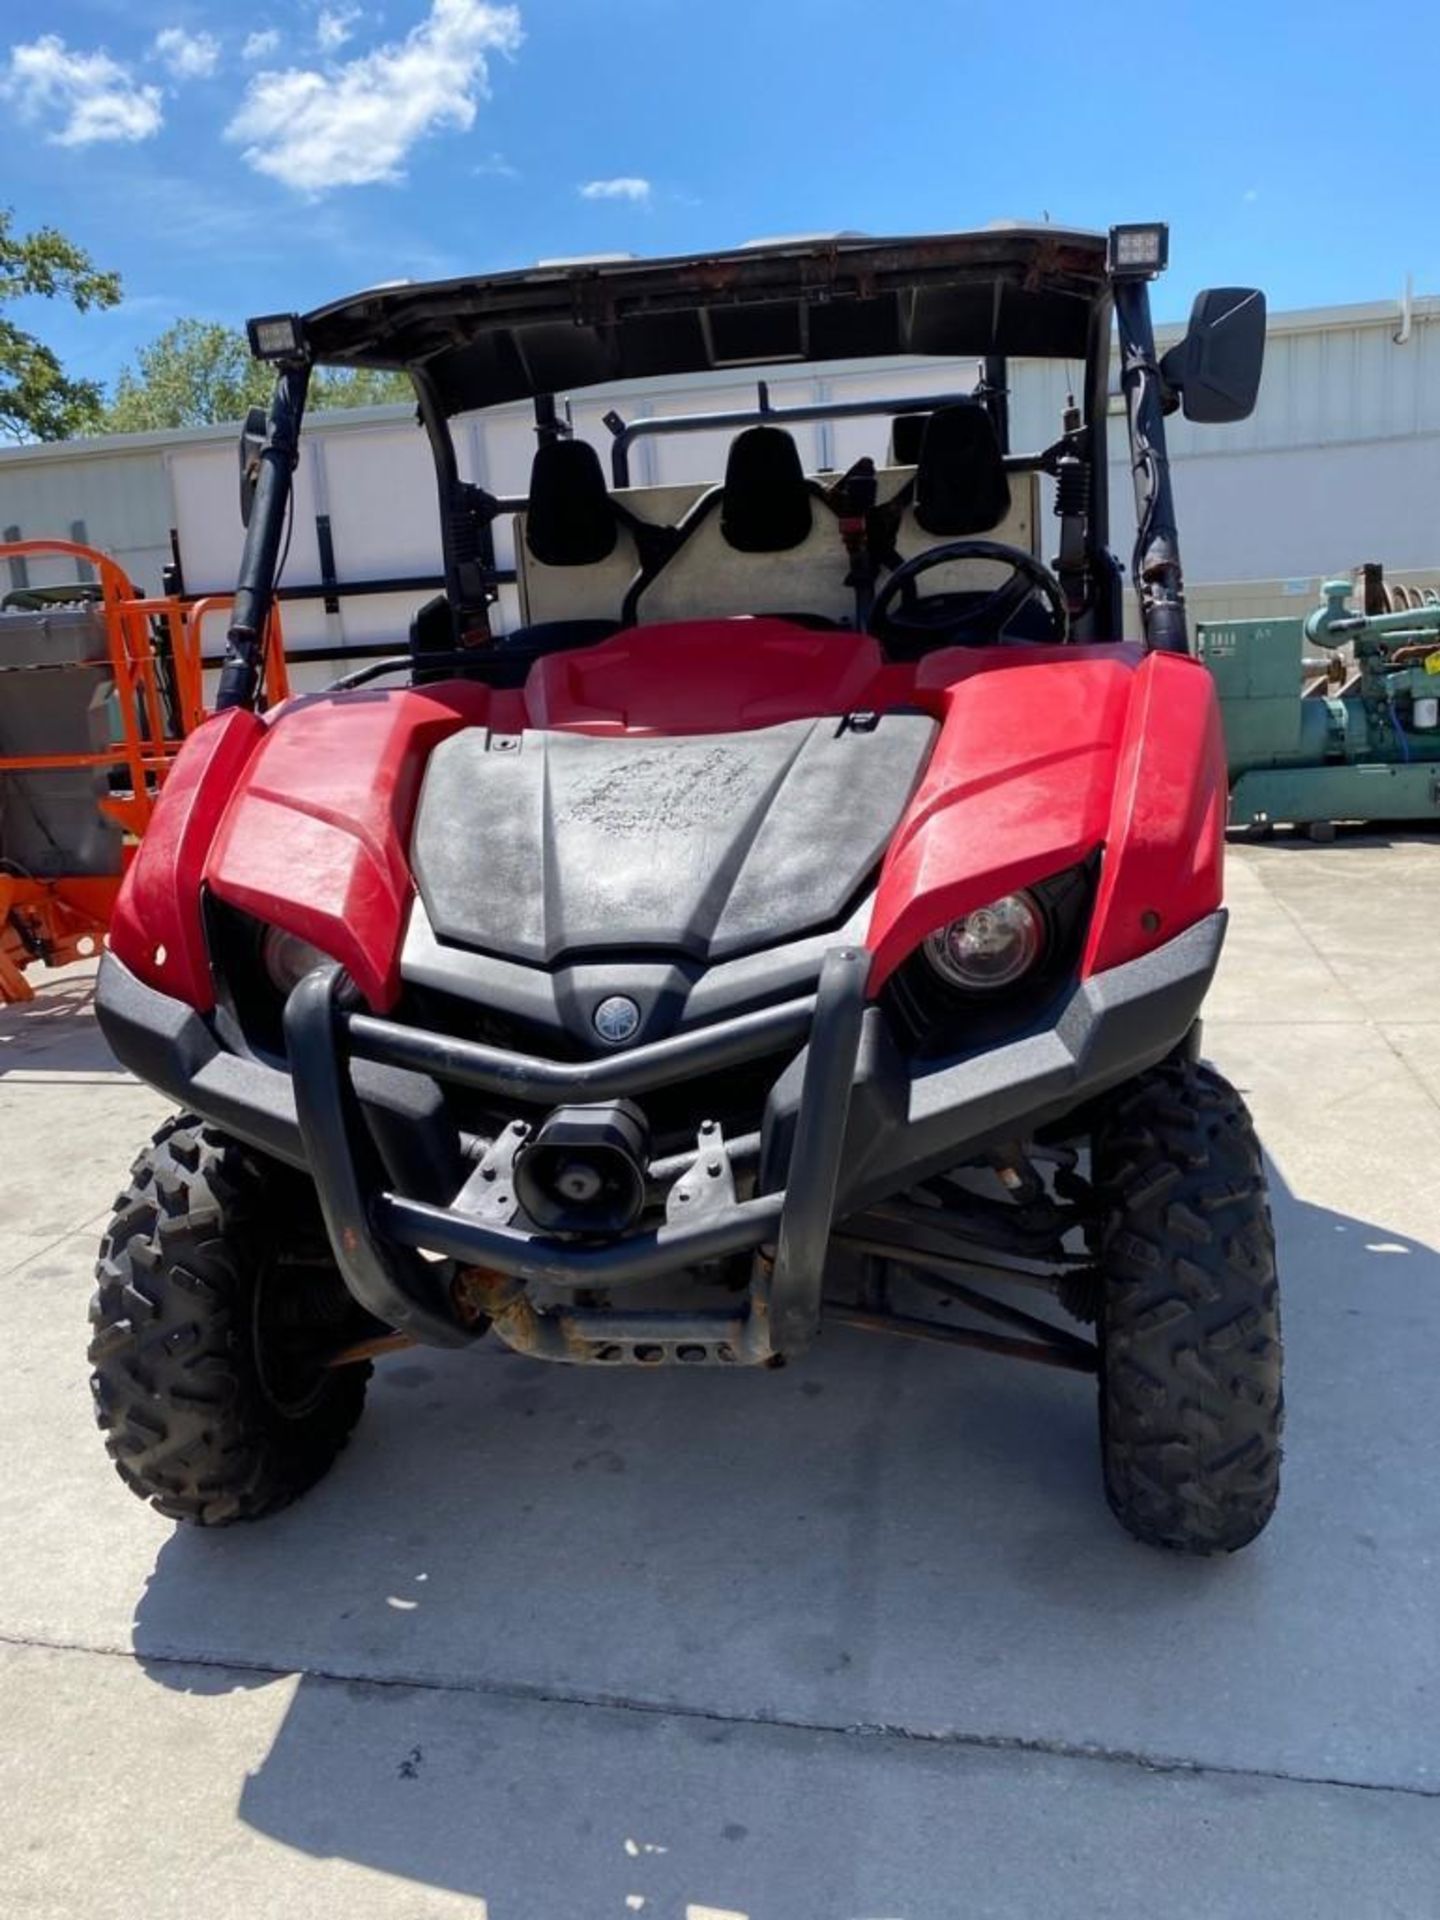 YAMAHA UTV WITH TOOL/STORAGE BIN, HAS RUST ON UNDER CARRIAGE AND FRAME, RUNS AND OPERATES - Image 4 of 20